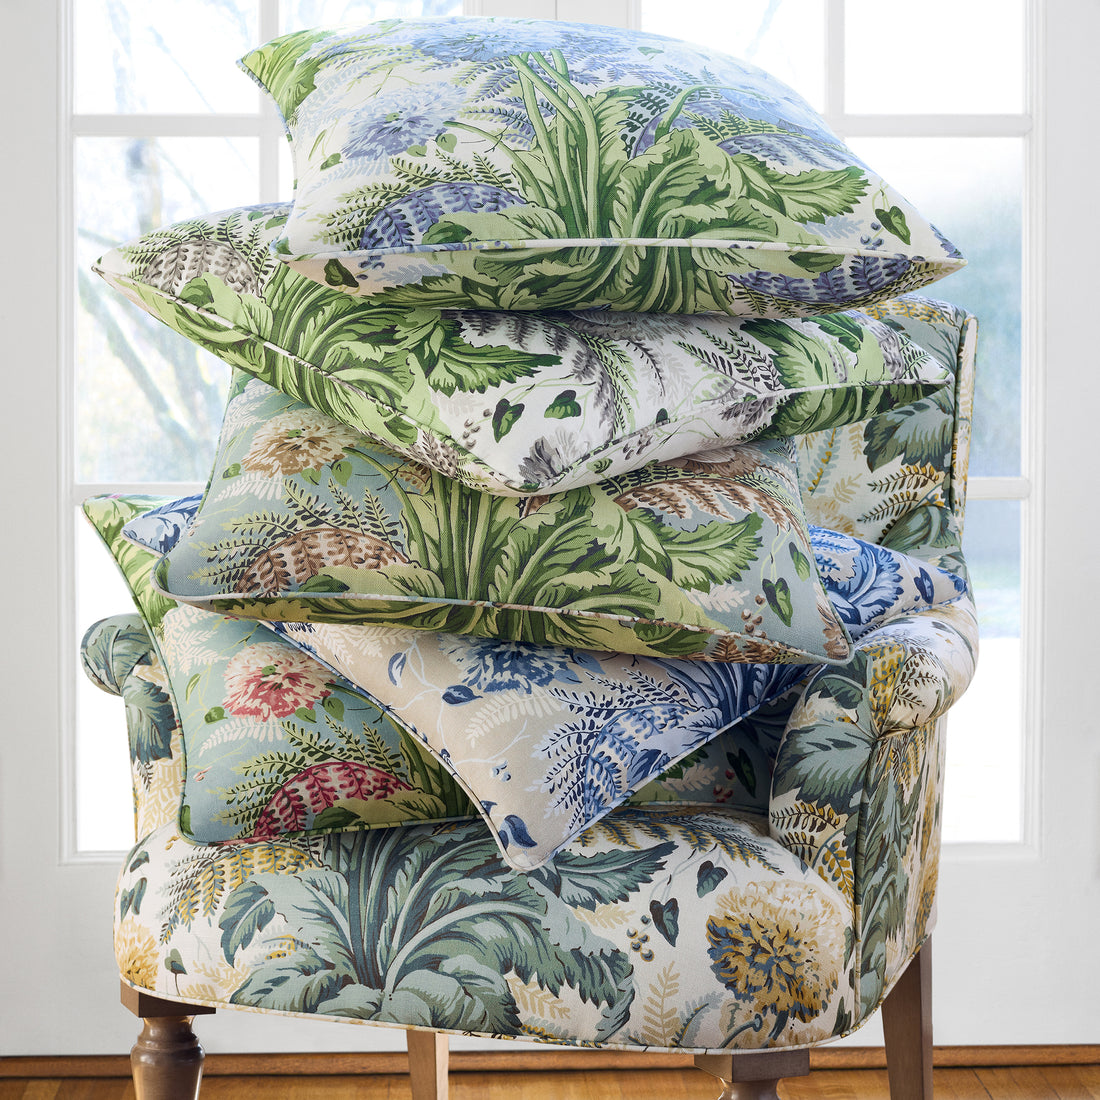 Pillows in Dahlia fabric by Anna French